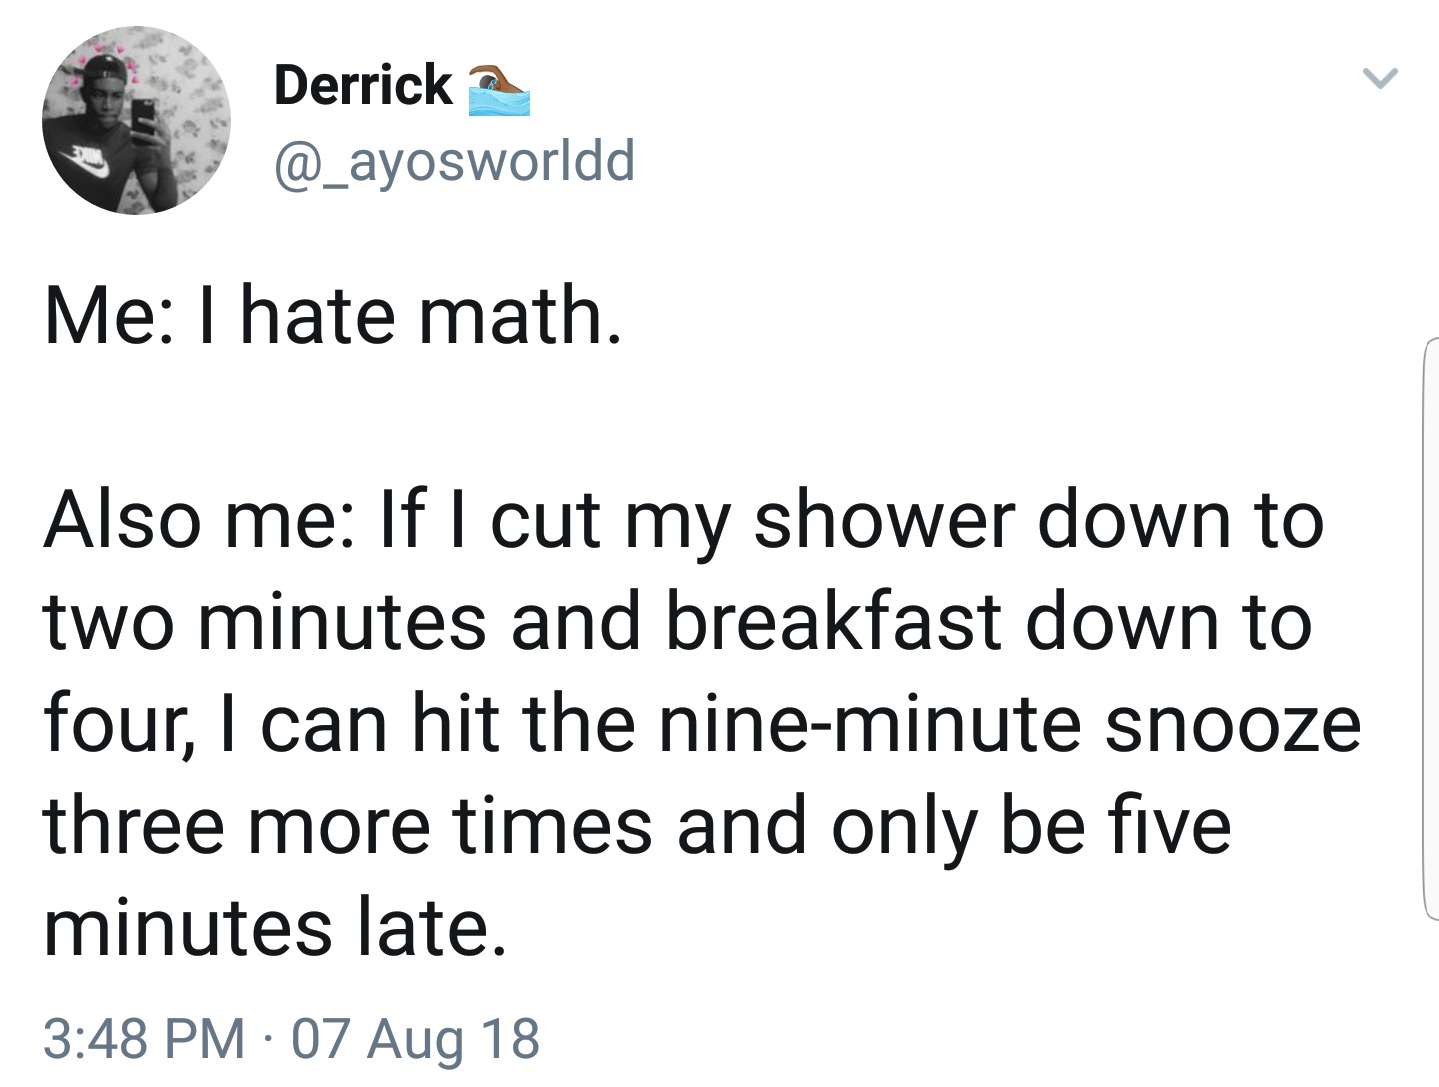 angle - Derrick Me I hate math. Also me If I cut my shower down to two minutes and breakfast down to four, I can hit the nineminute snooze three more times and only be five minutes late. 07 Aug 18